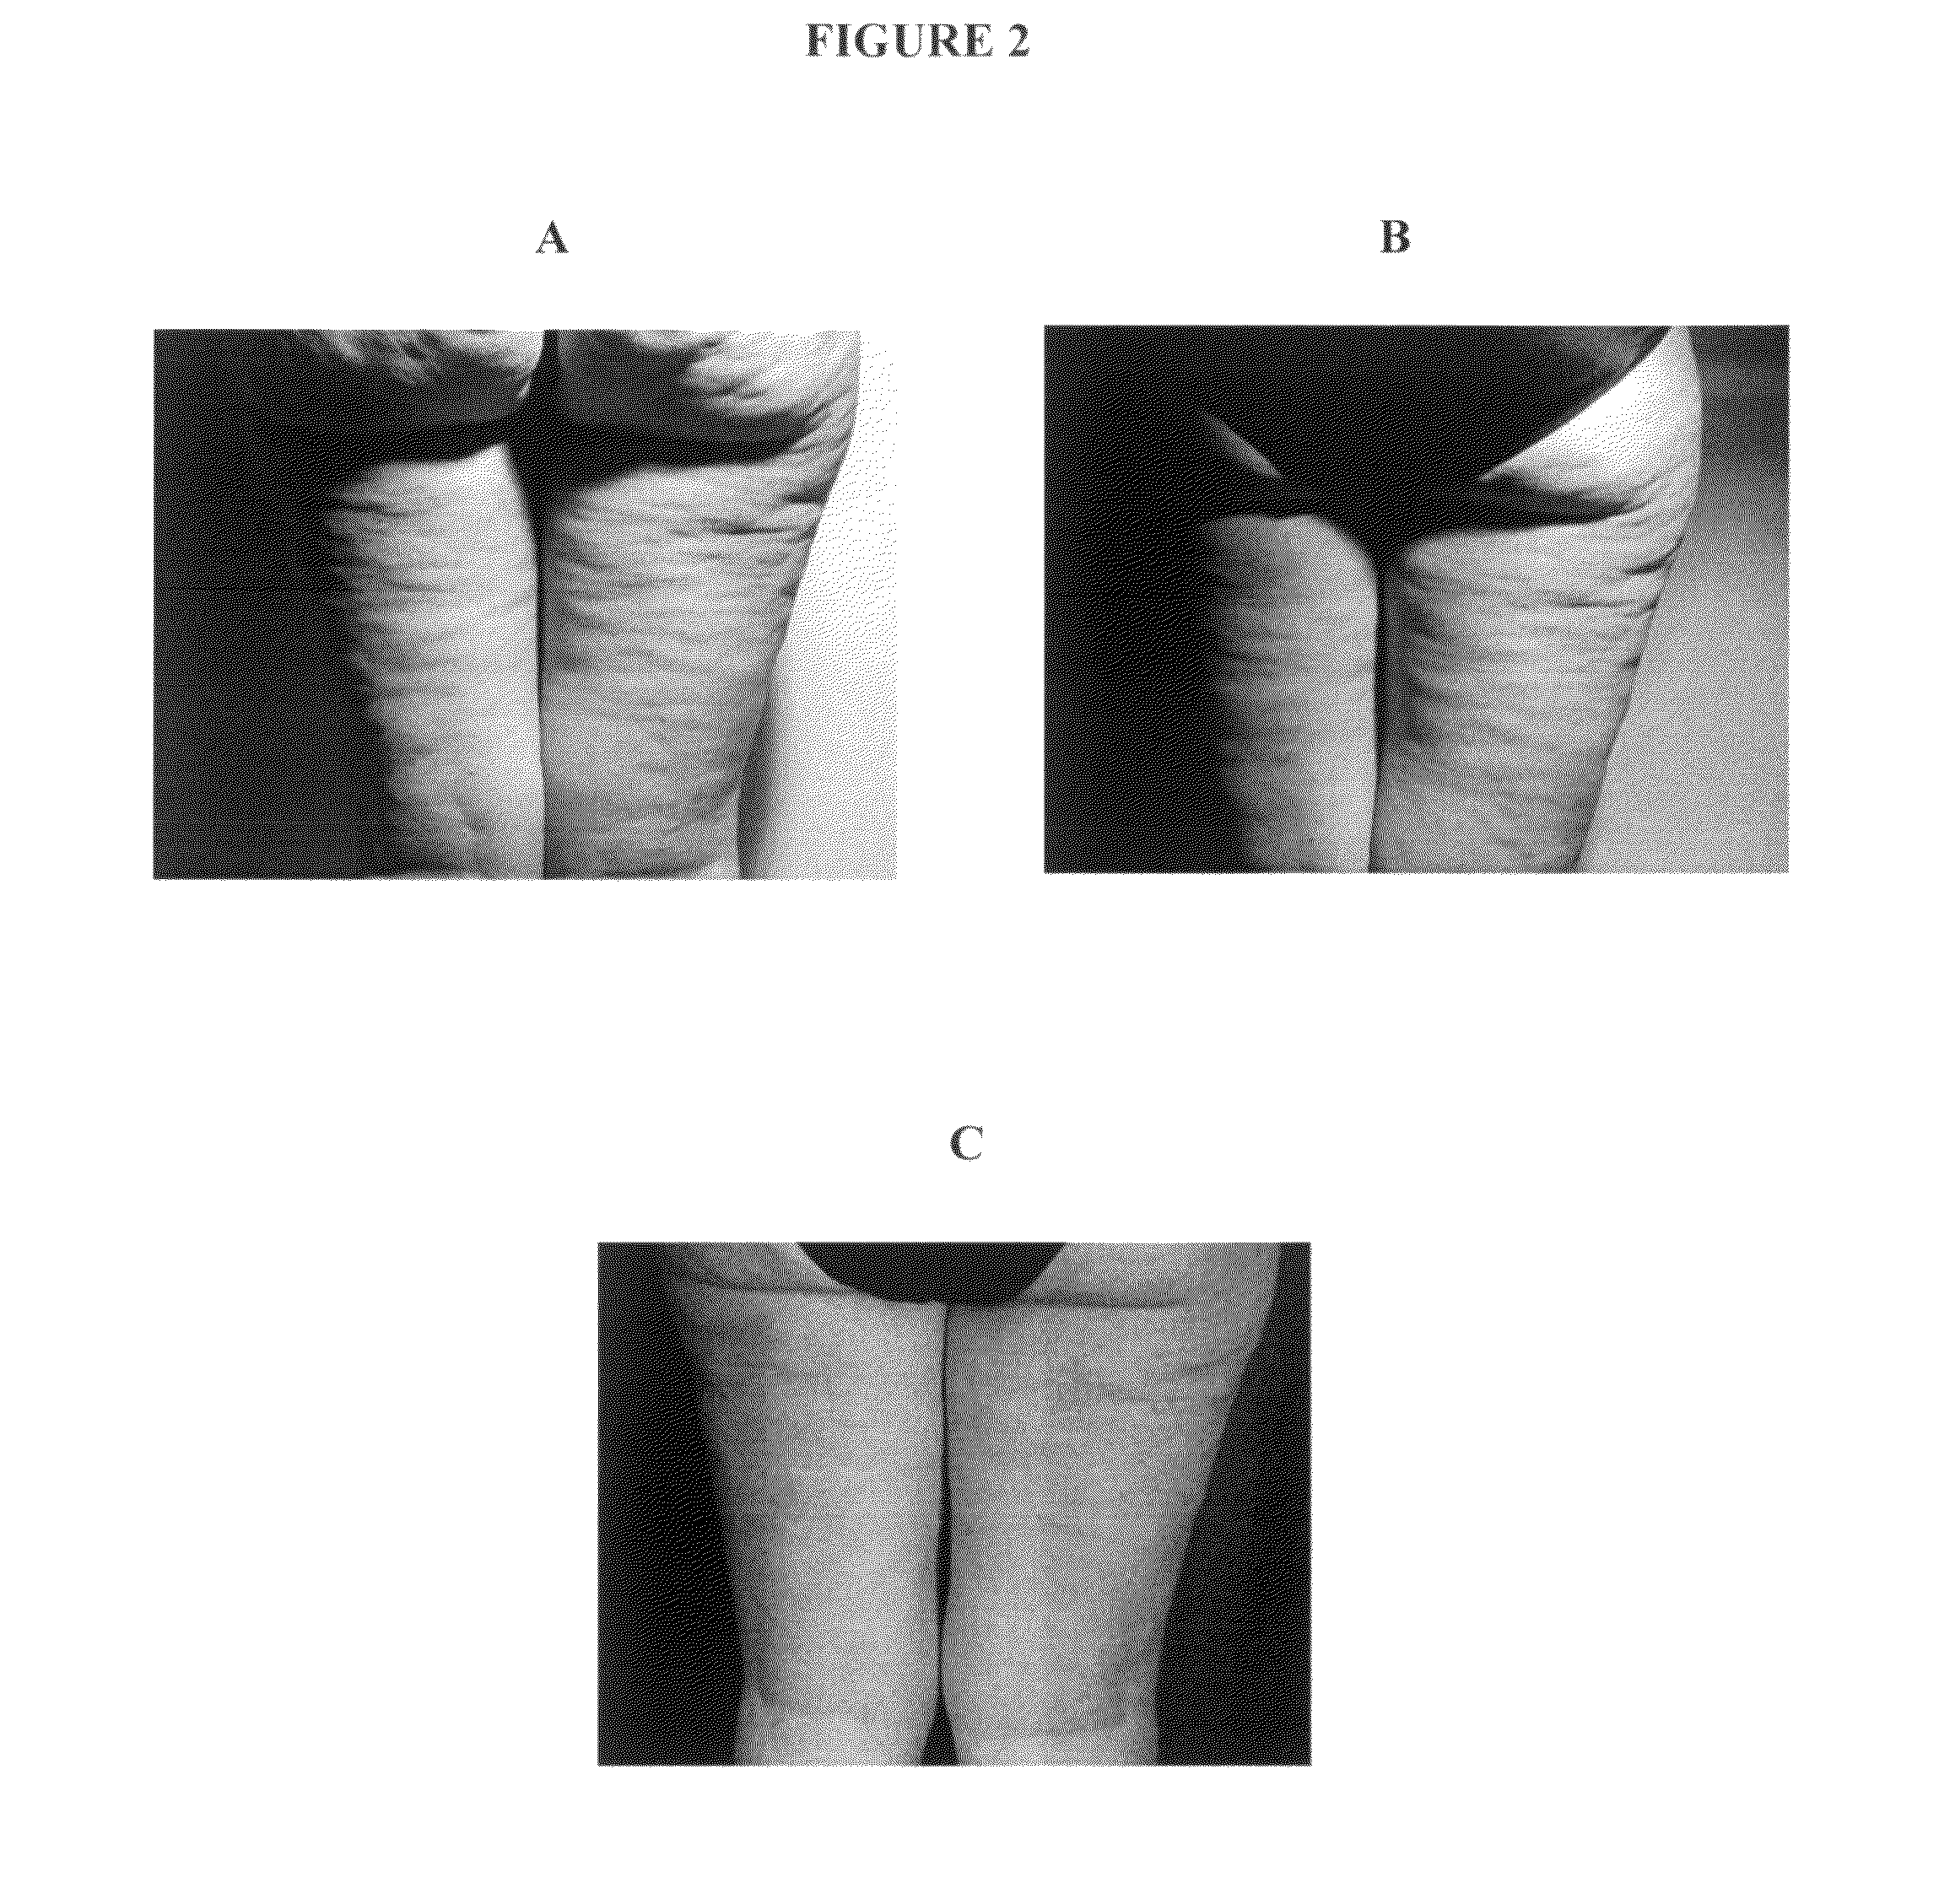 PDT treatment method for cellulites and cosmetic use